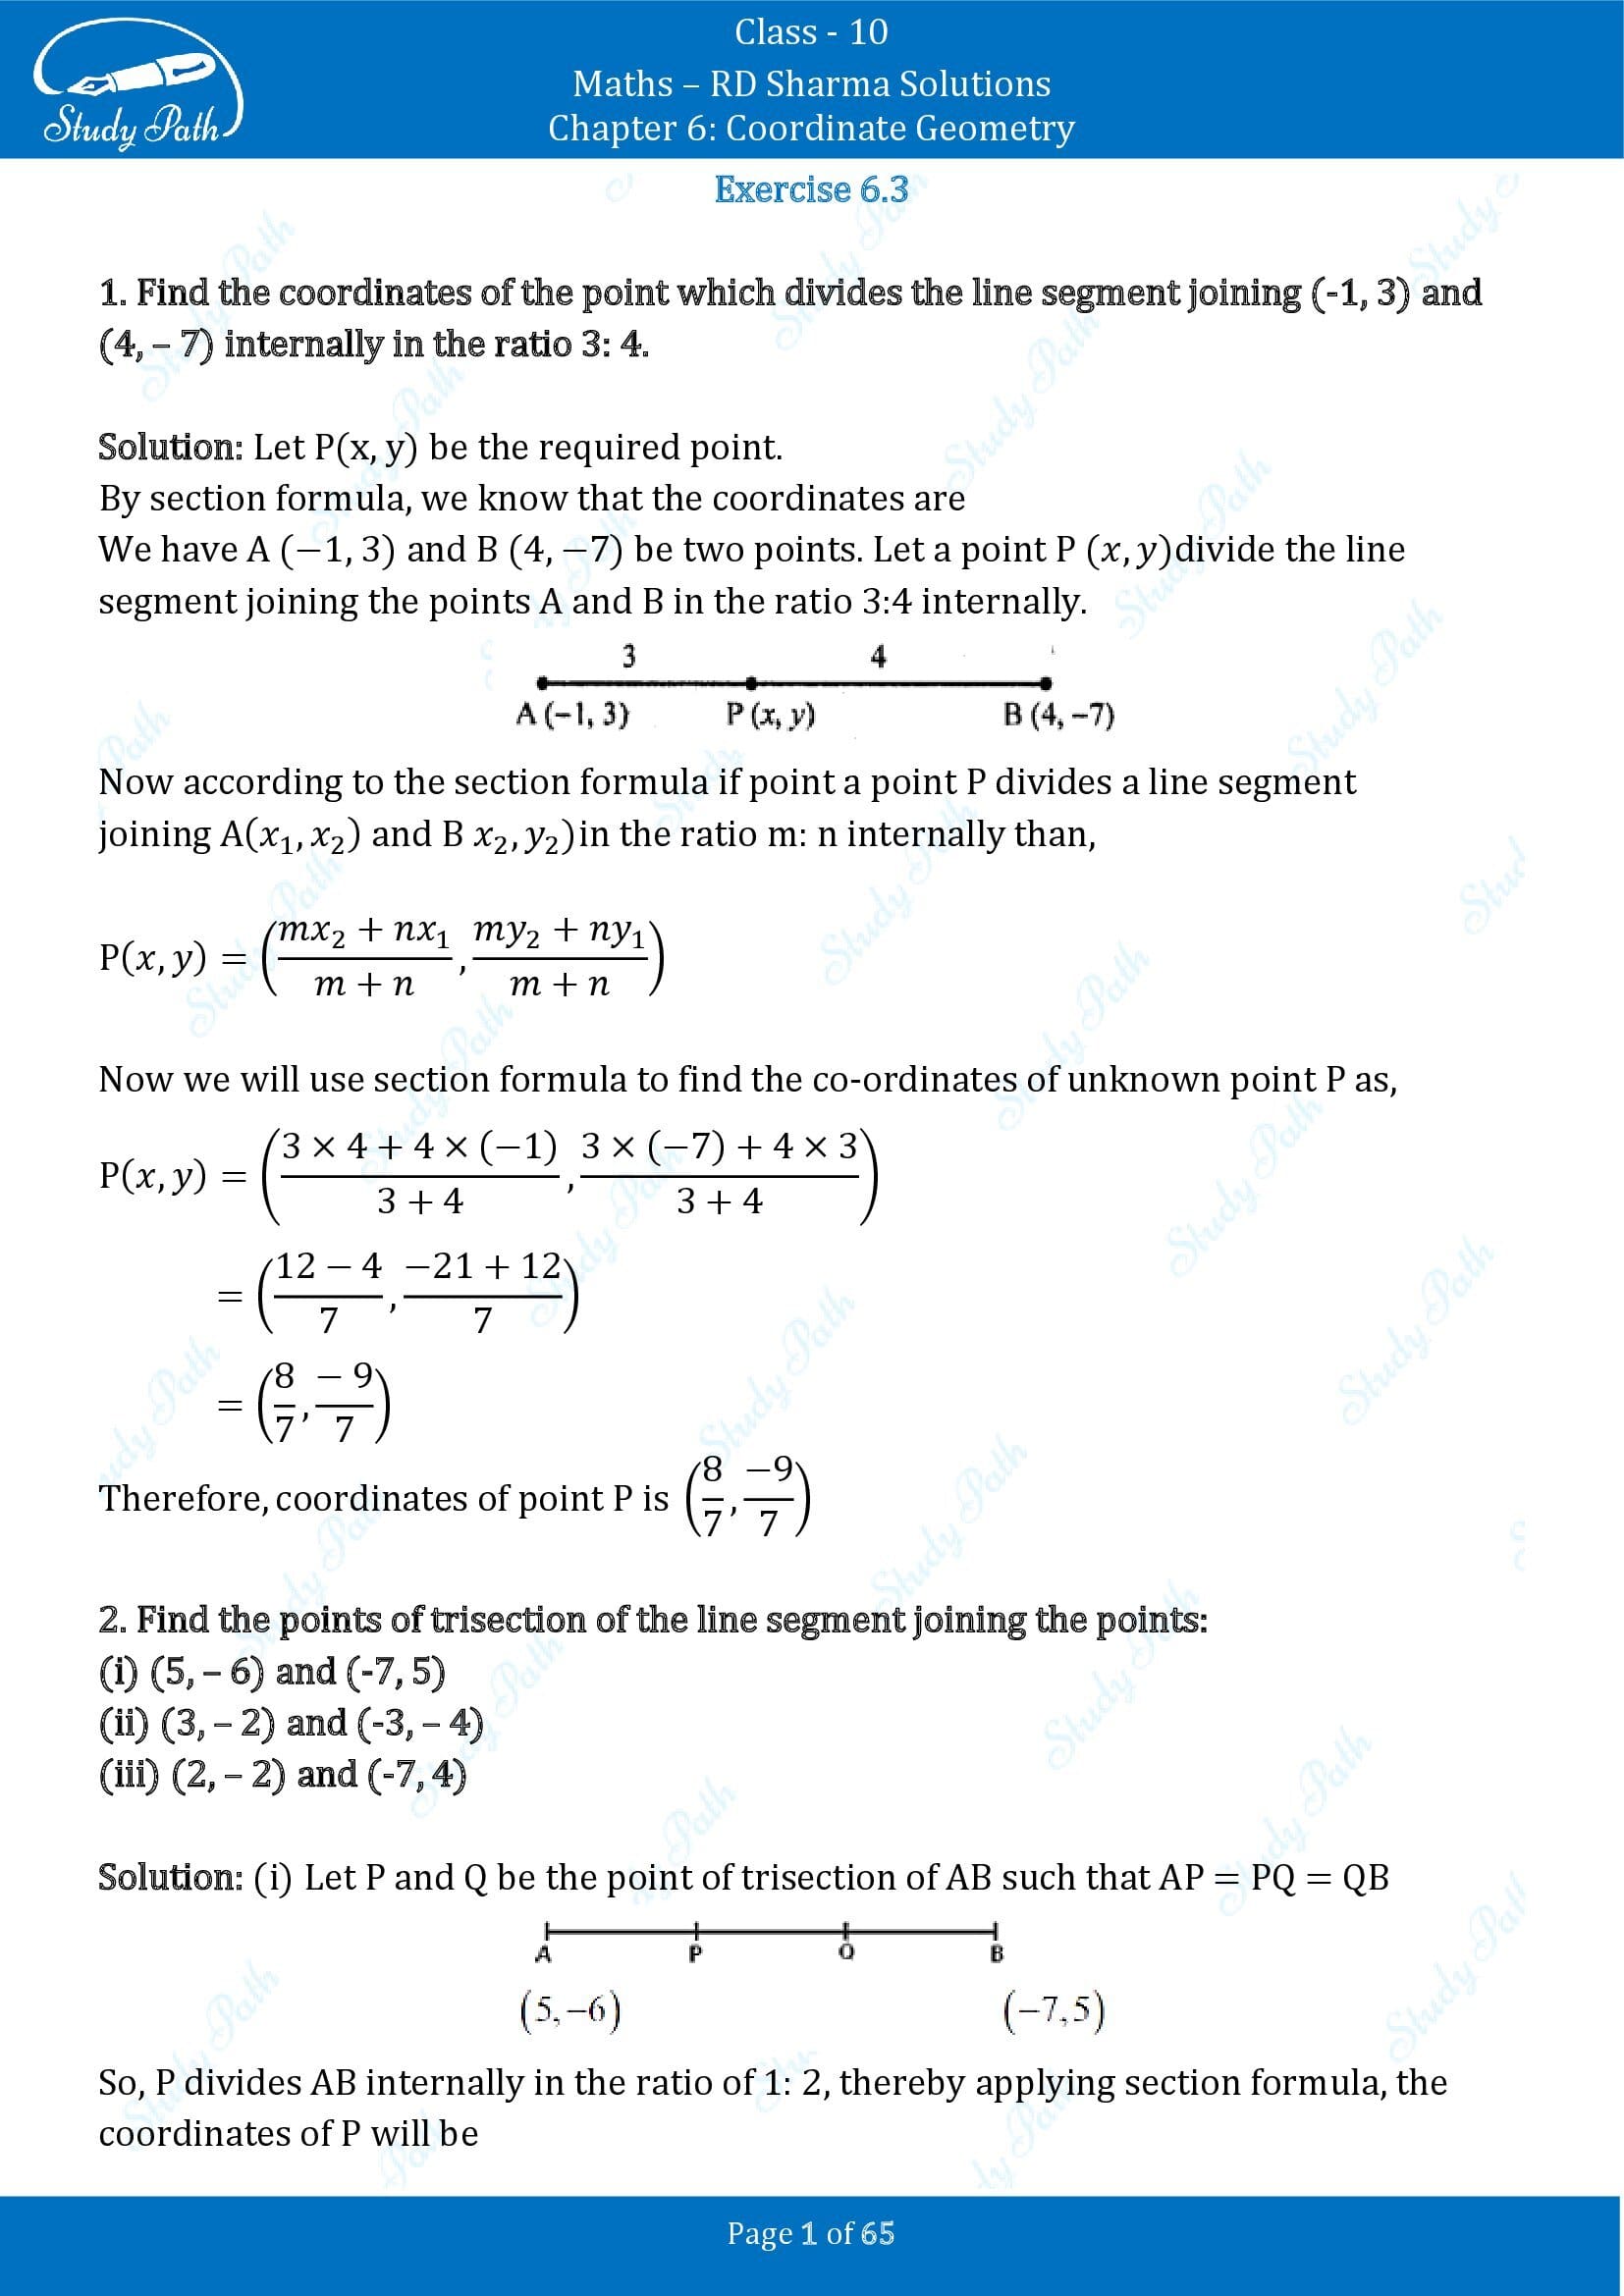 RD Sharma Solutions Class 10 Chapter 6 Coordinate Geometry Exercise 6.3 00001